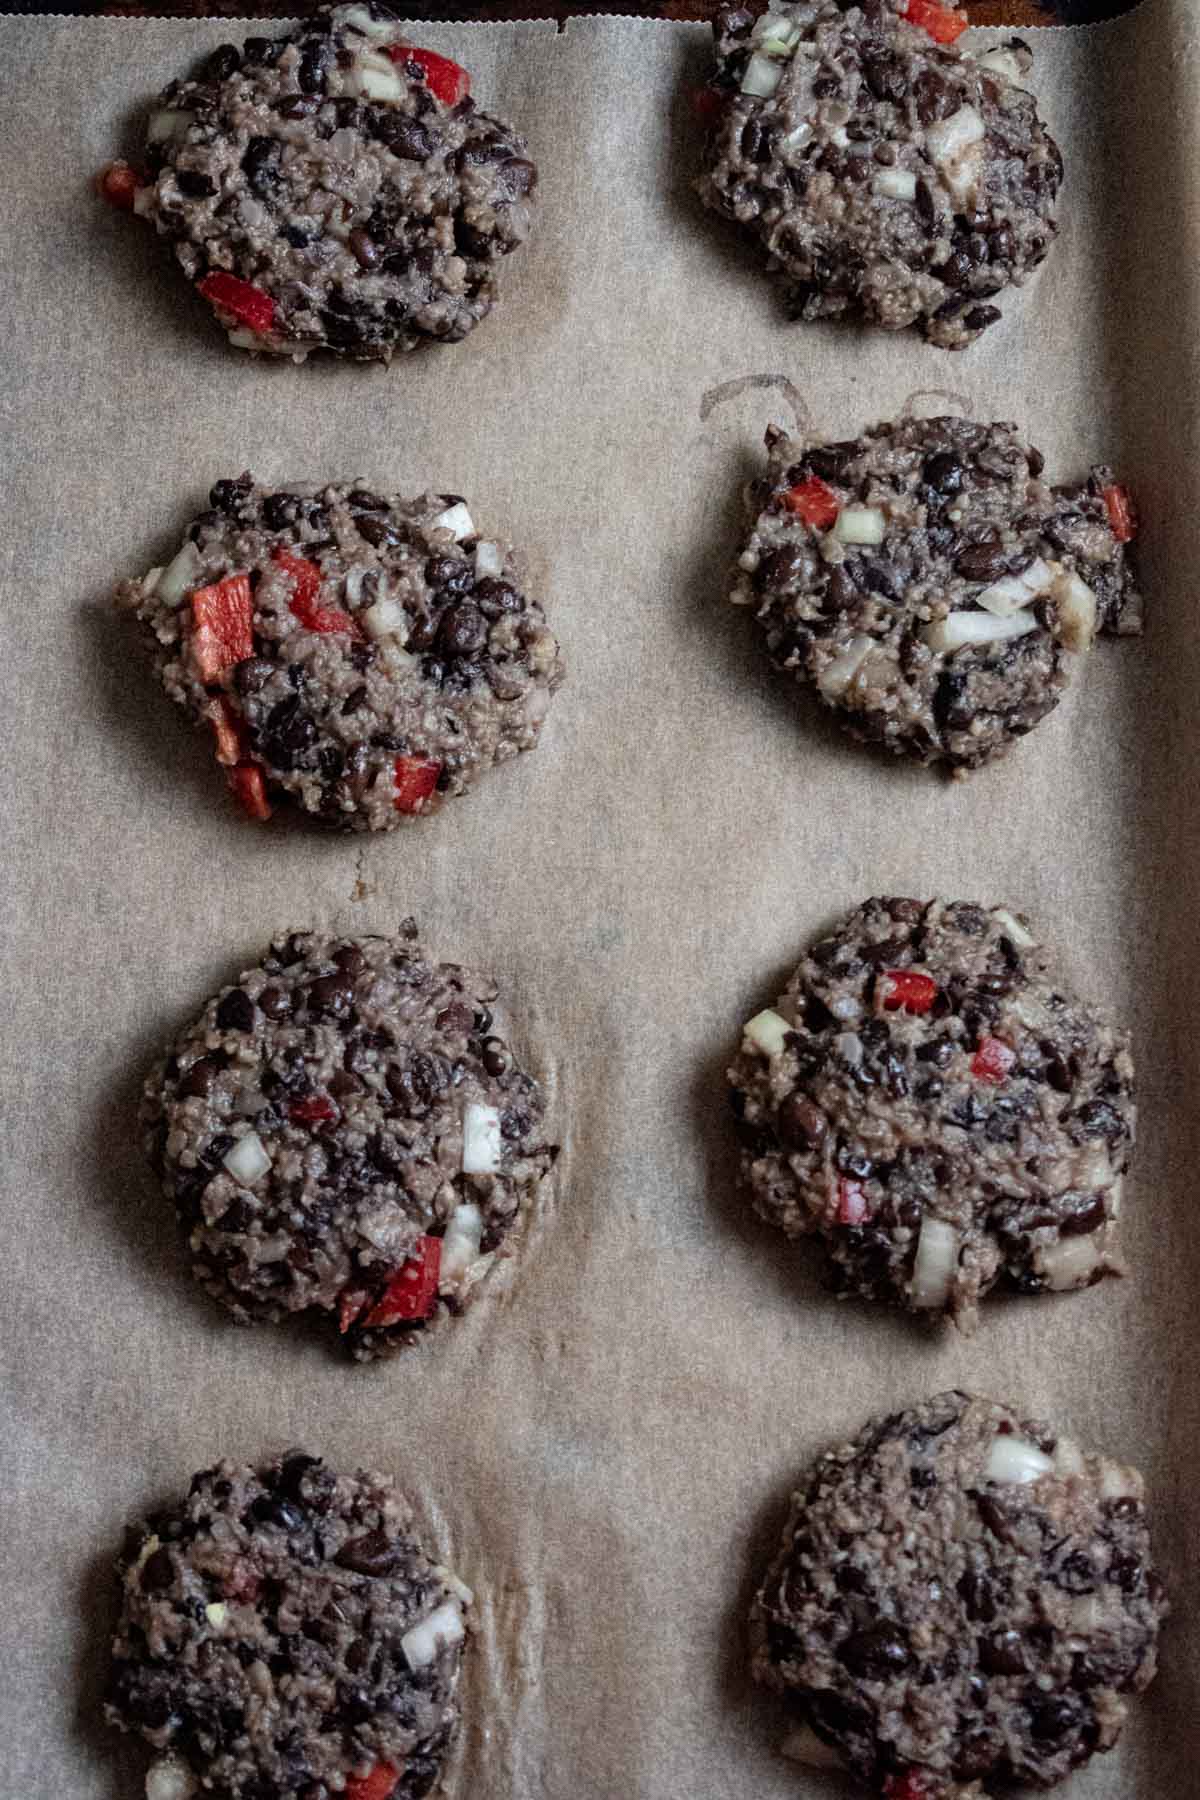 8 black bean burgers lined on a baking tray with parchment paper